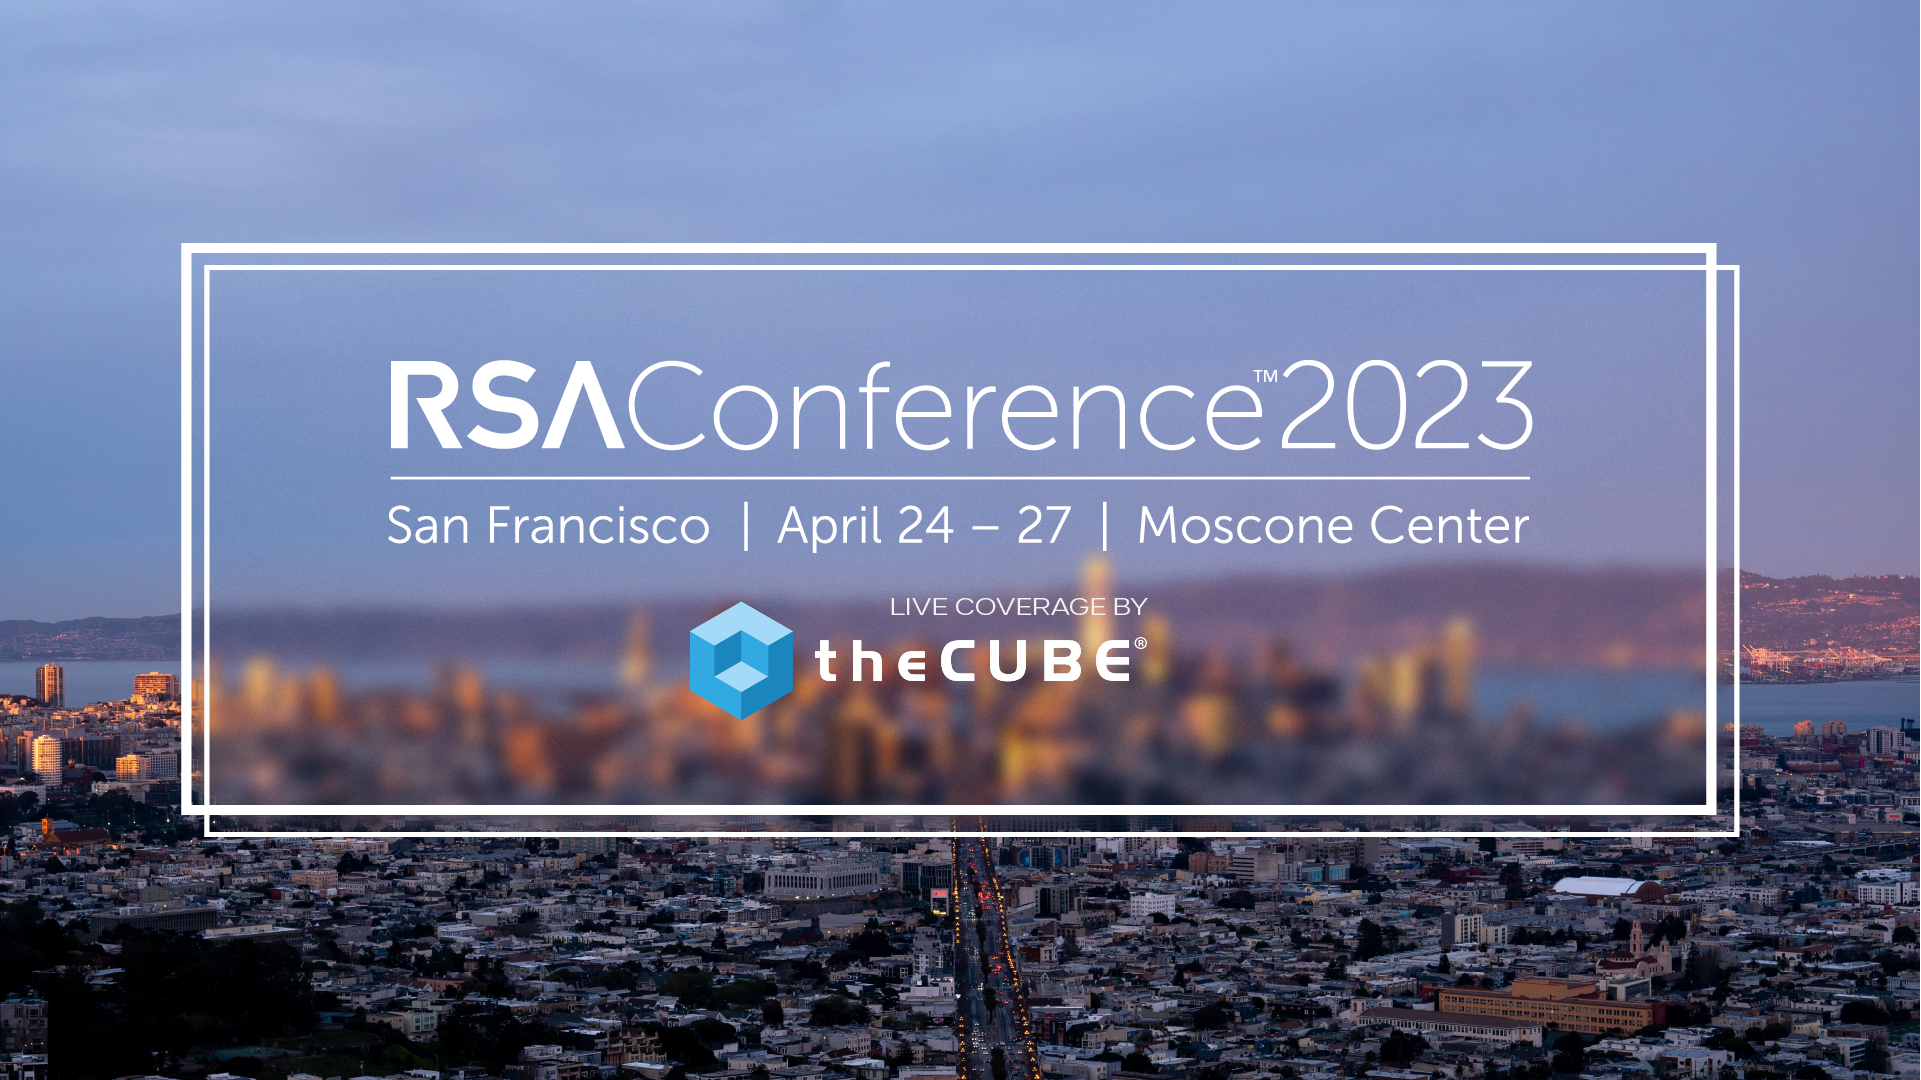 San Francisco background overlayed with the words 'RSA Conference 2023'